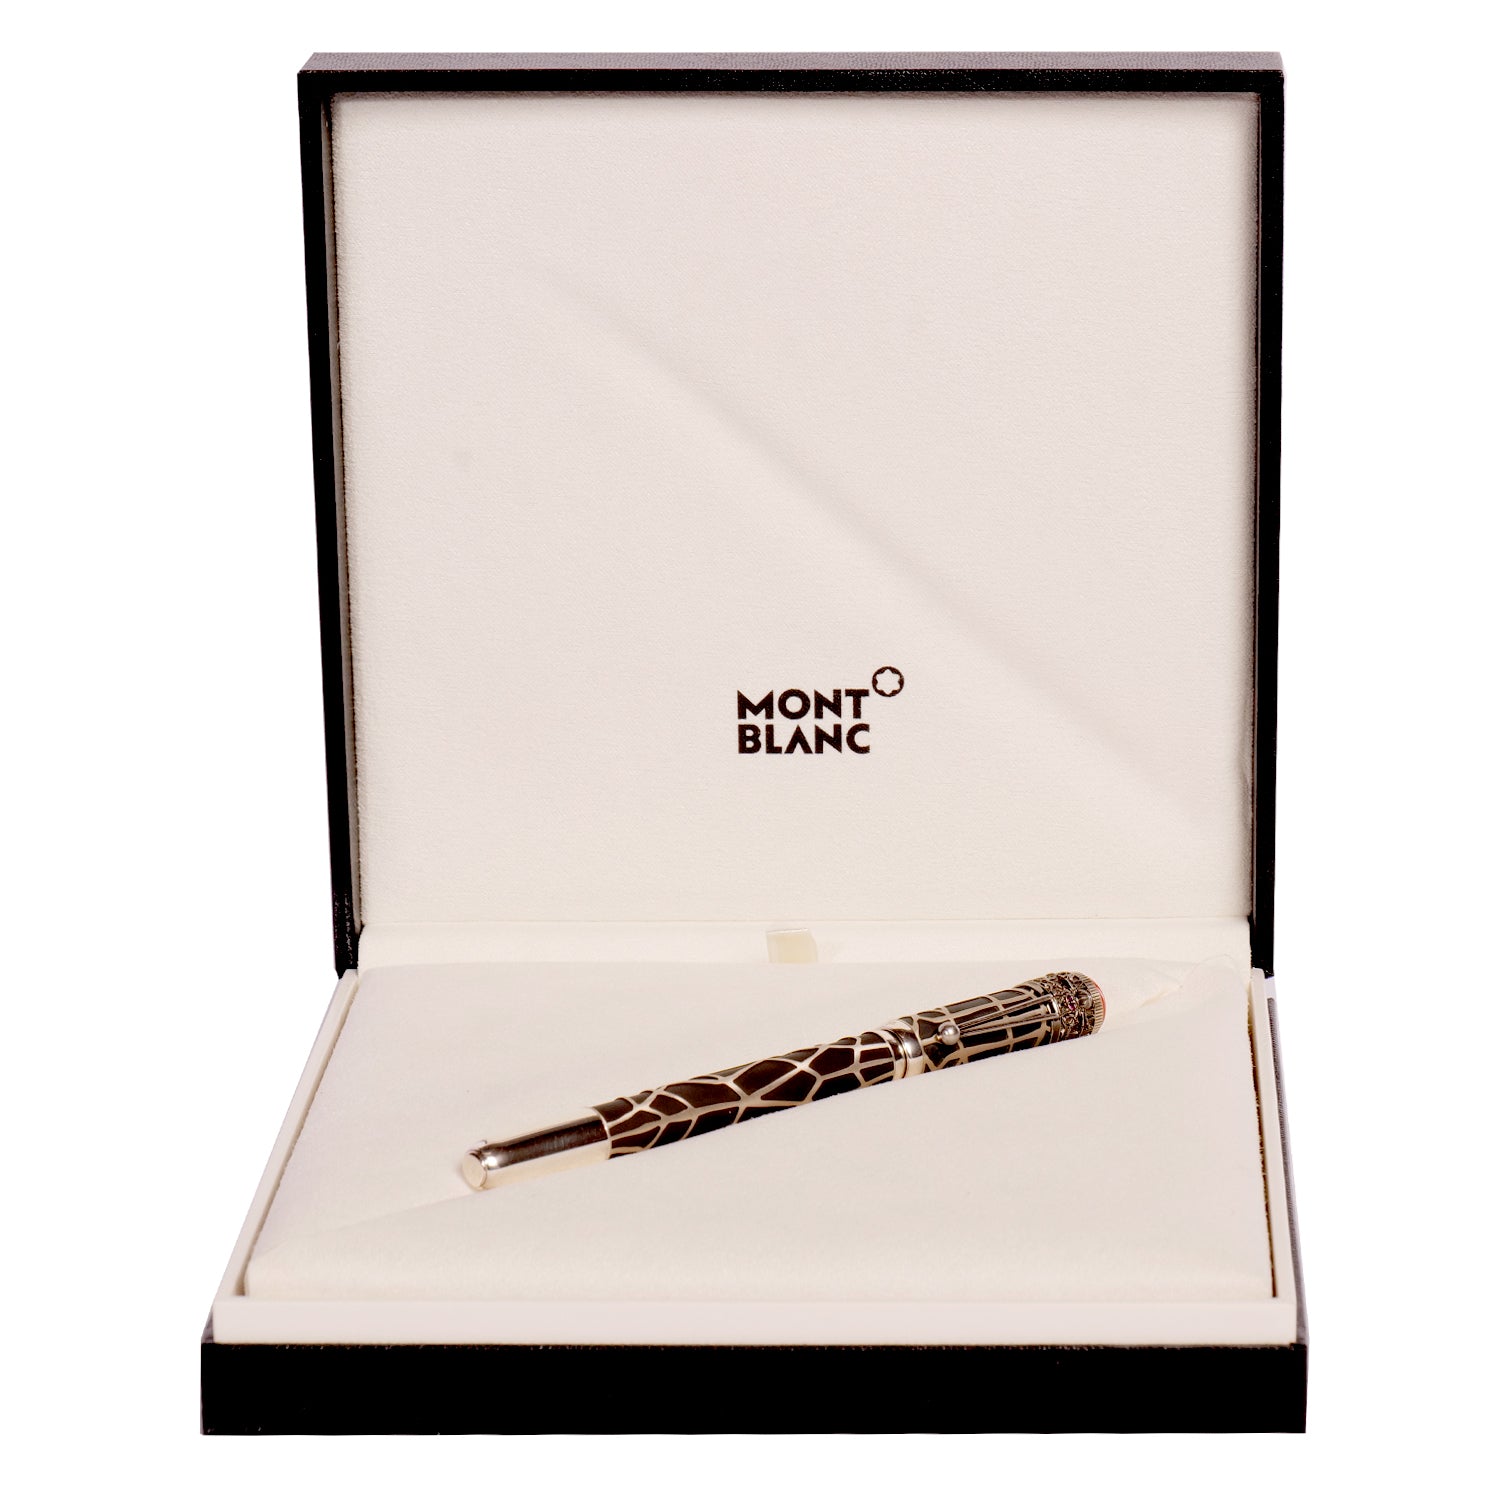 MONT BLANC HERITAGE SPIDER LIMITED EDITION 1906 FOUNTAIN PEN